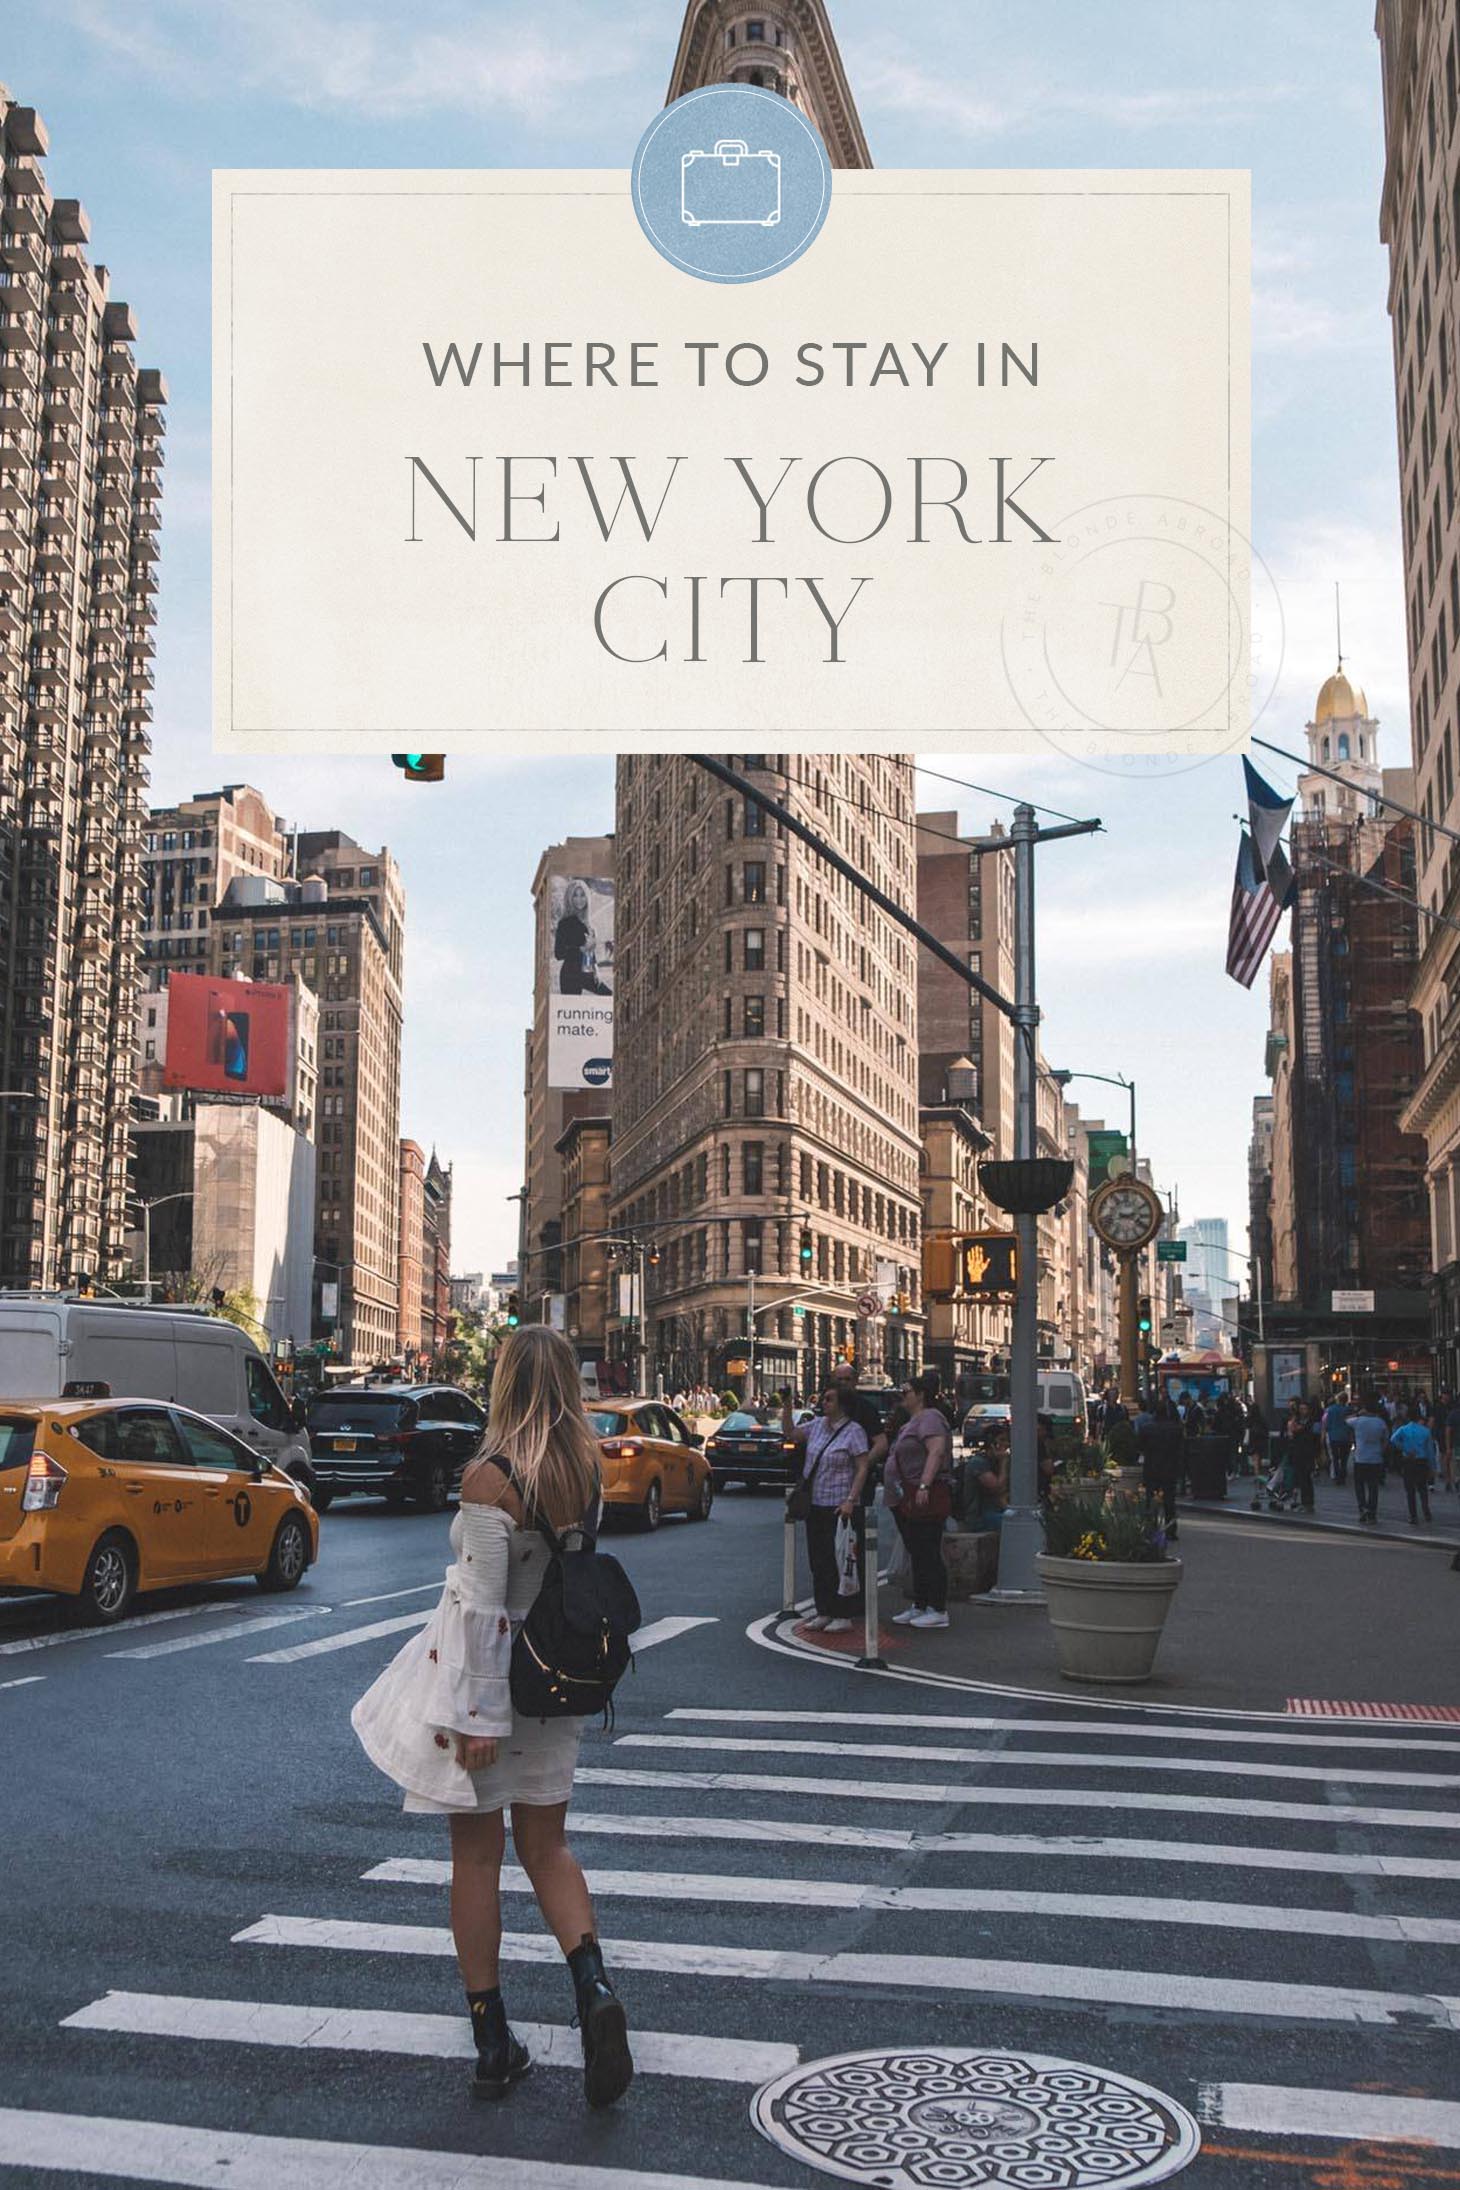 How to Become a New York City Tour Guide